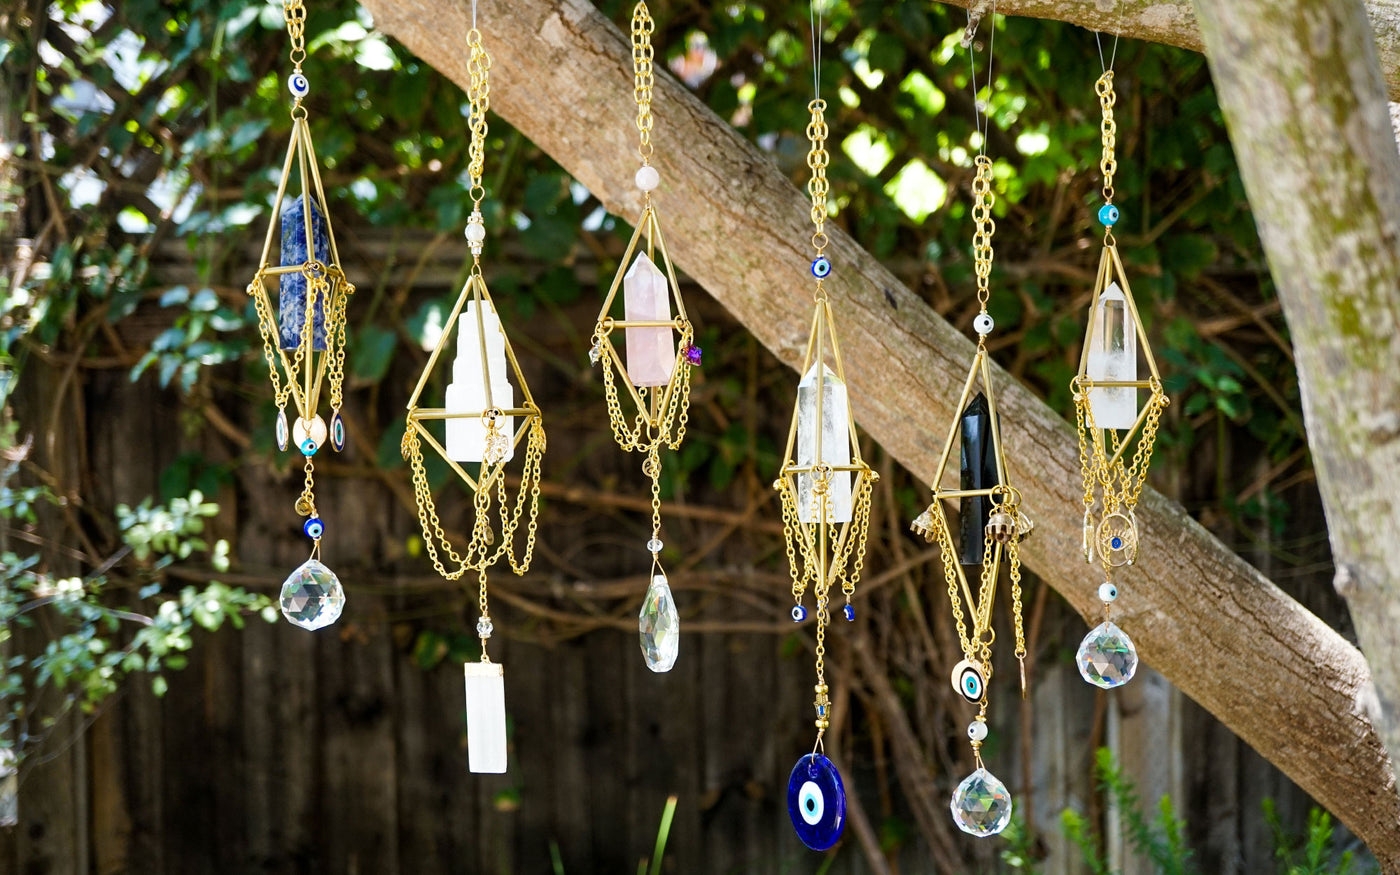 Group of 5 gold draped chain natural crystal chandeliers hanging on branch of a tree outside by Energy Muse